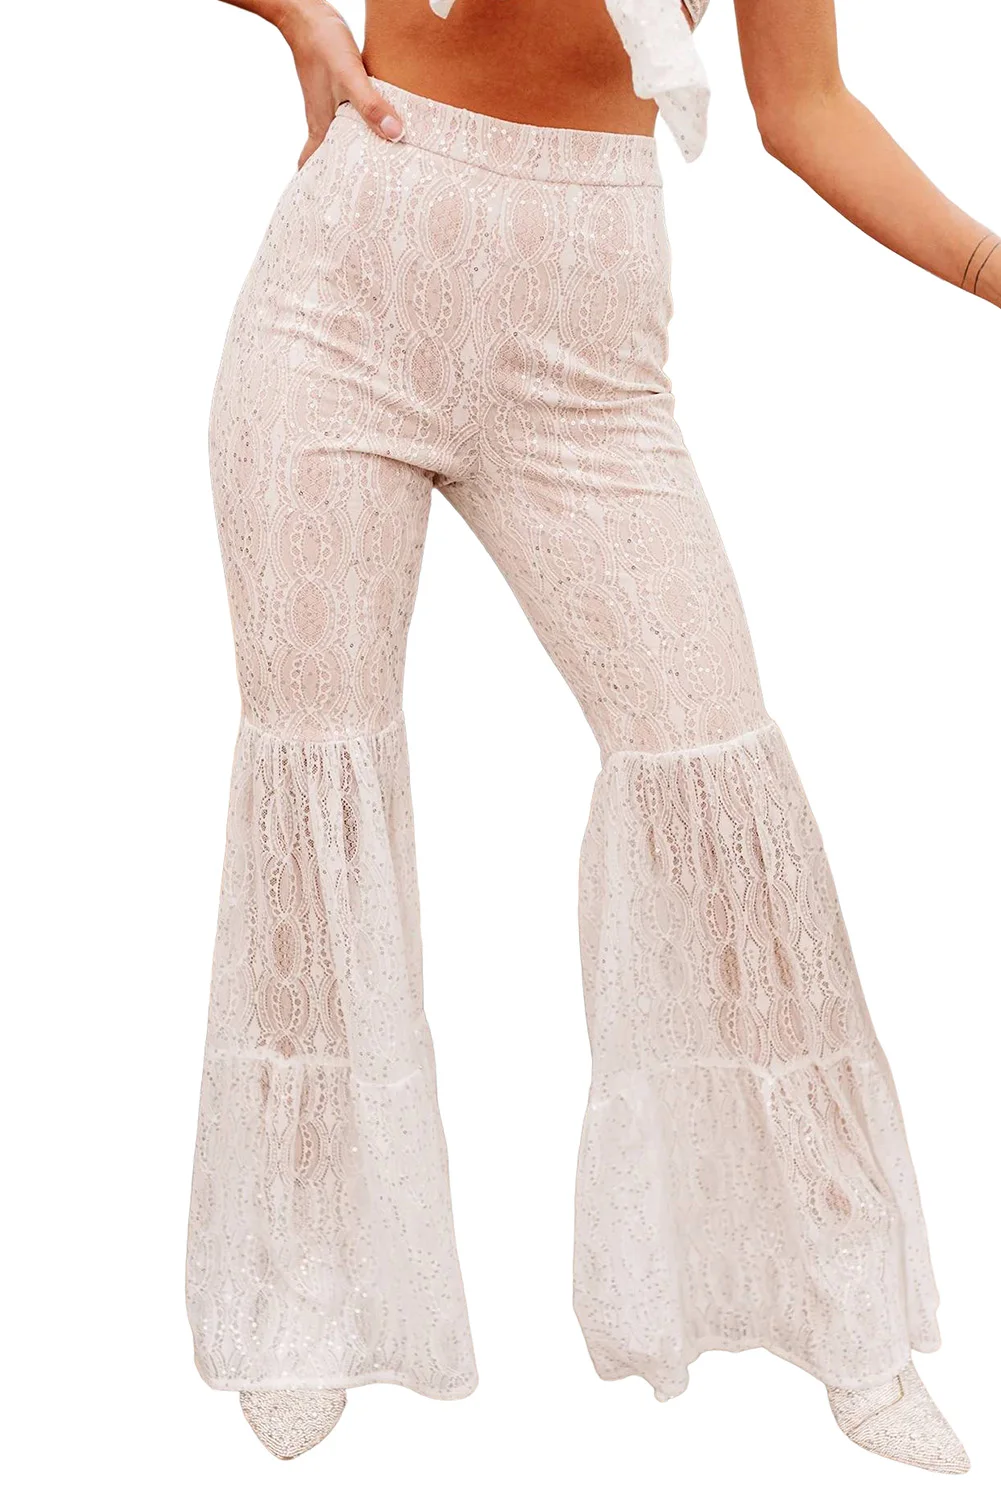 Dear-Lover Y2K Elastic Waist White Lace Tiered Ladies Trousers High Waist Flare Women Sequin Pants